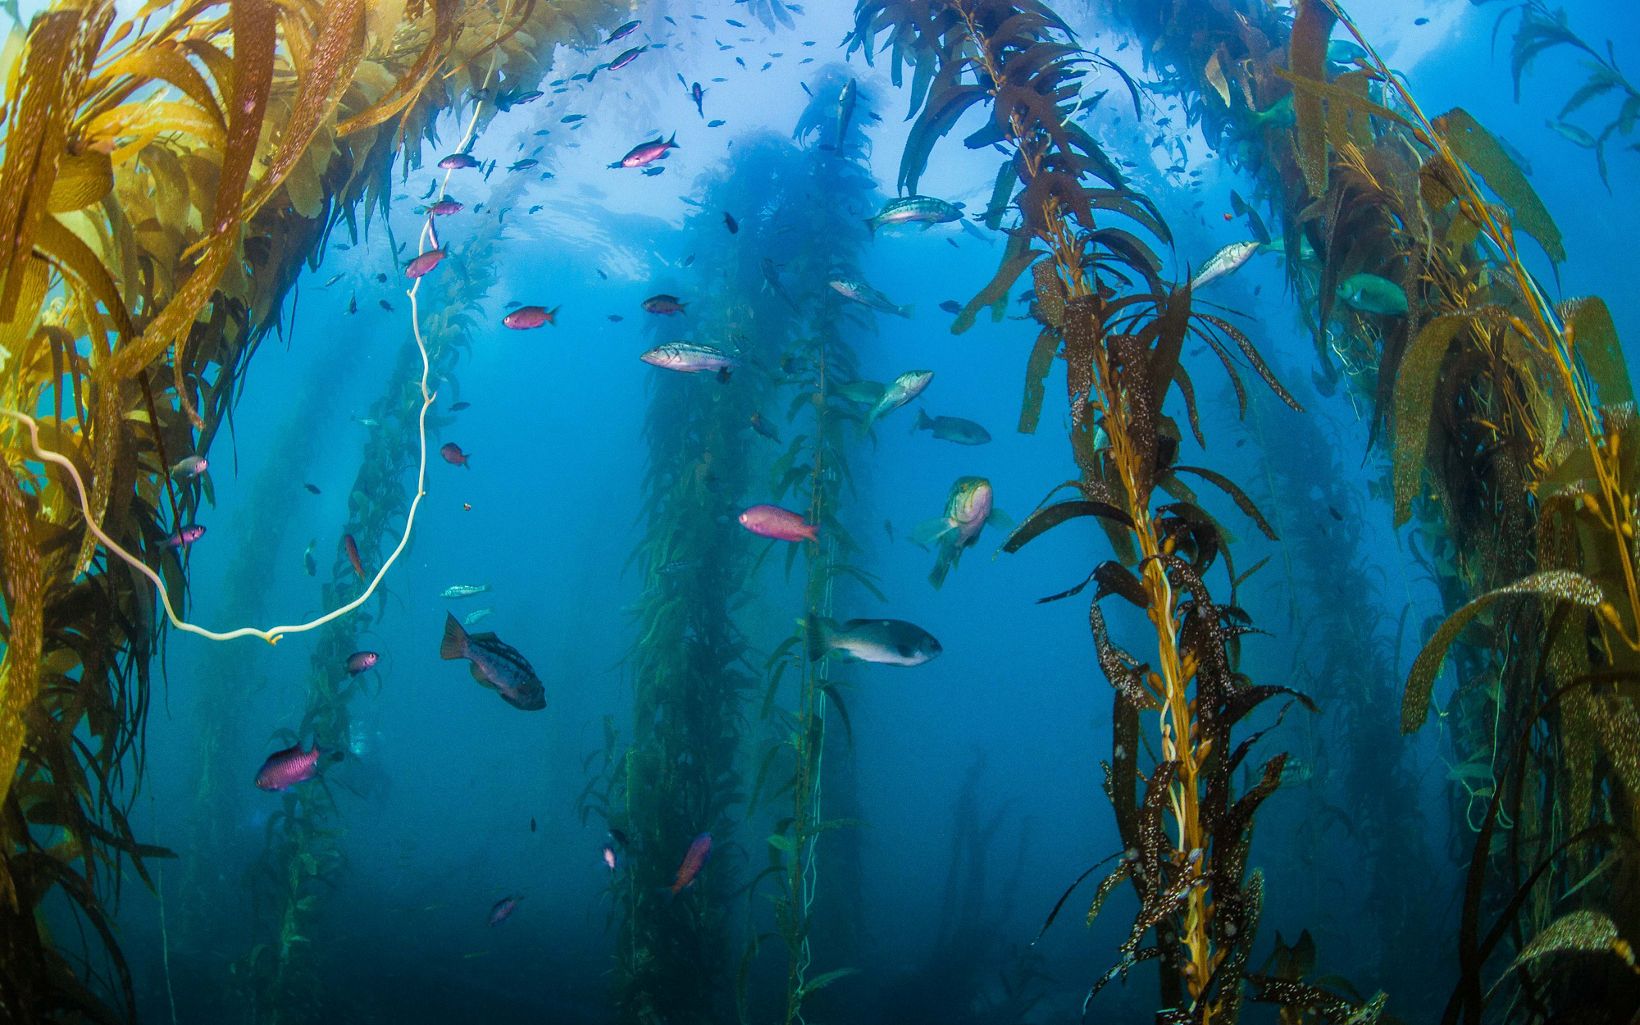 Kelp forest viewed from under water